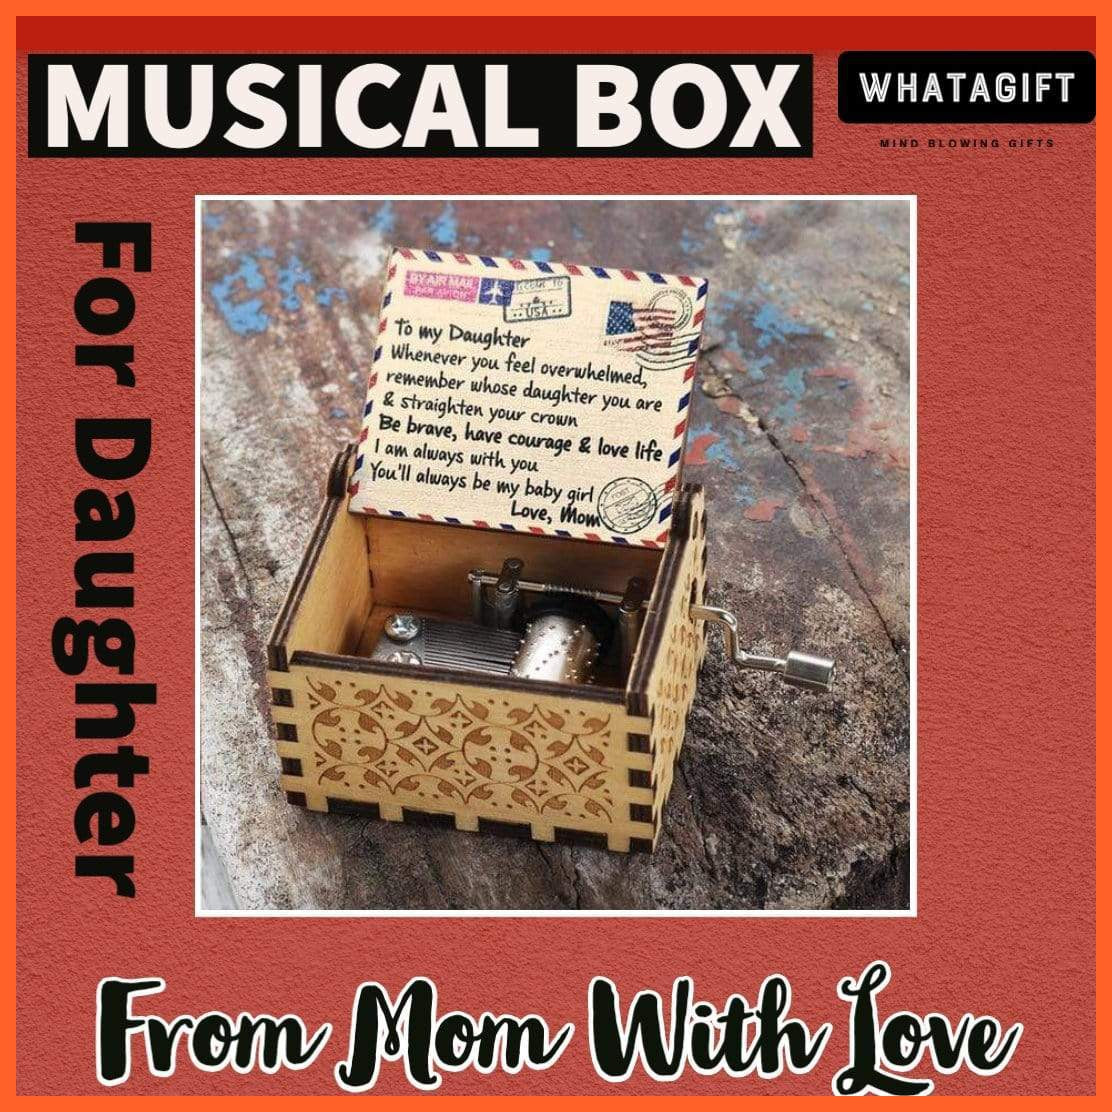 Wooden Classical Music Box For Daughter From Mom | whatagift.com.au.